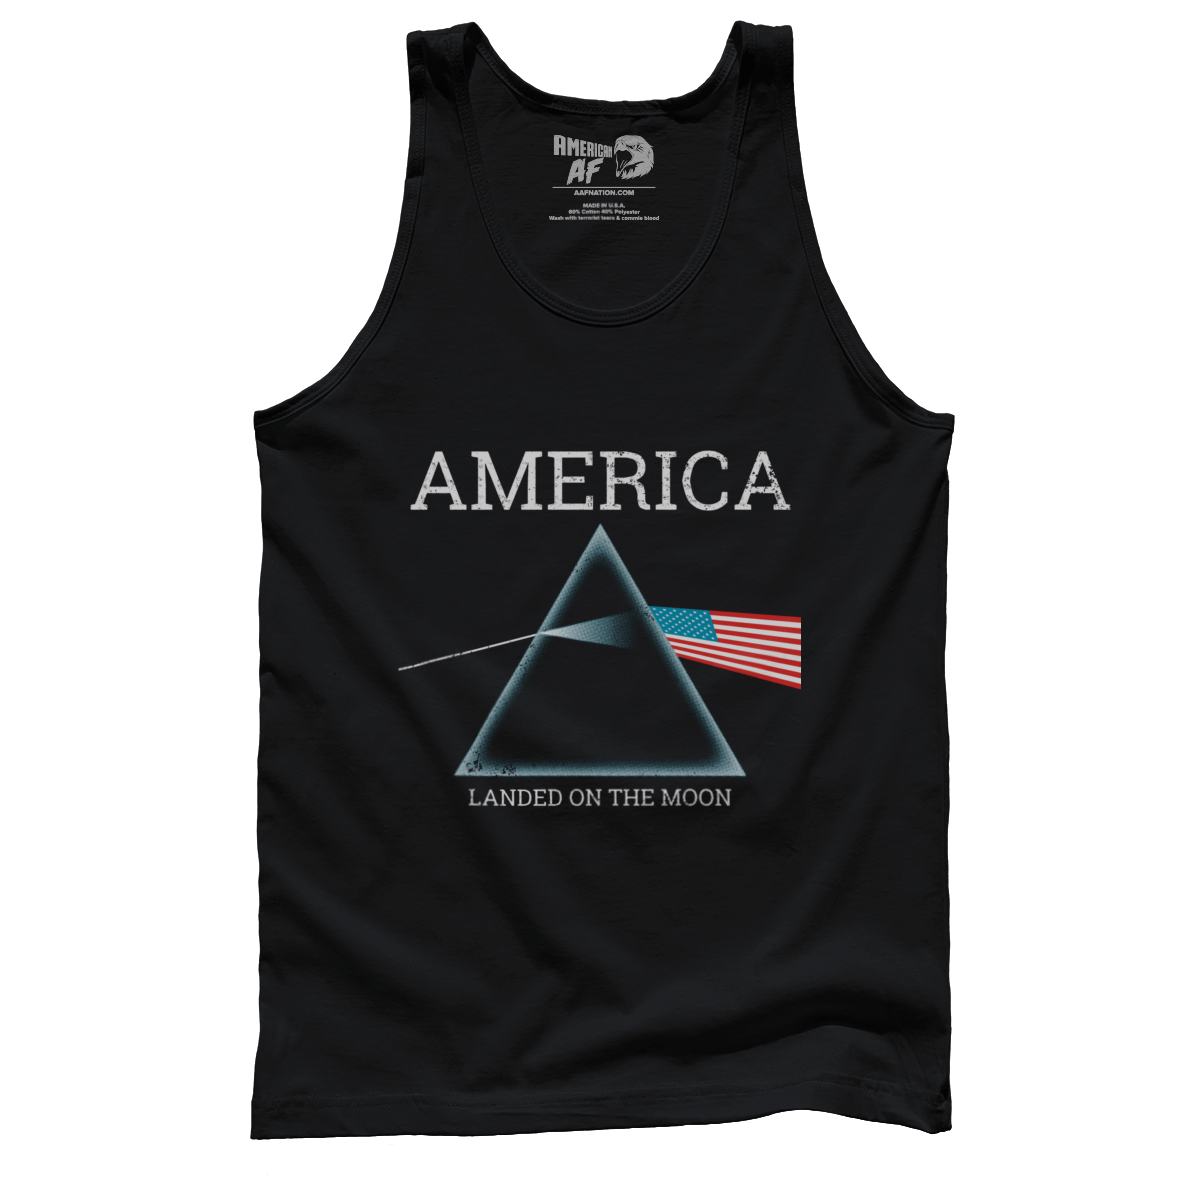 Apparel Premium Mens Tank / Black / XS Landed on the Moon - January 2020 Club AAF Exclusive Design